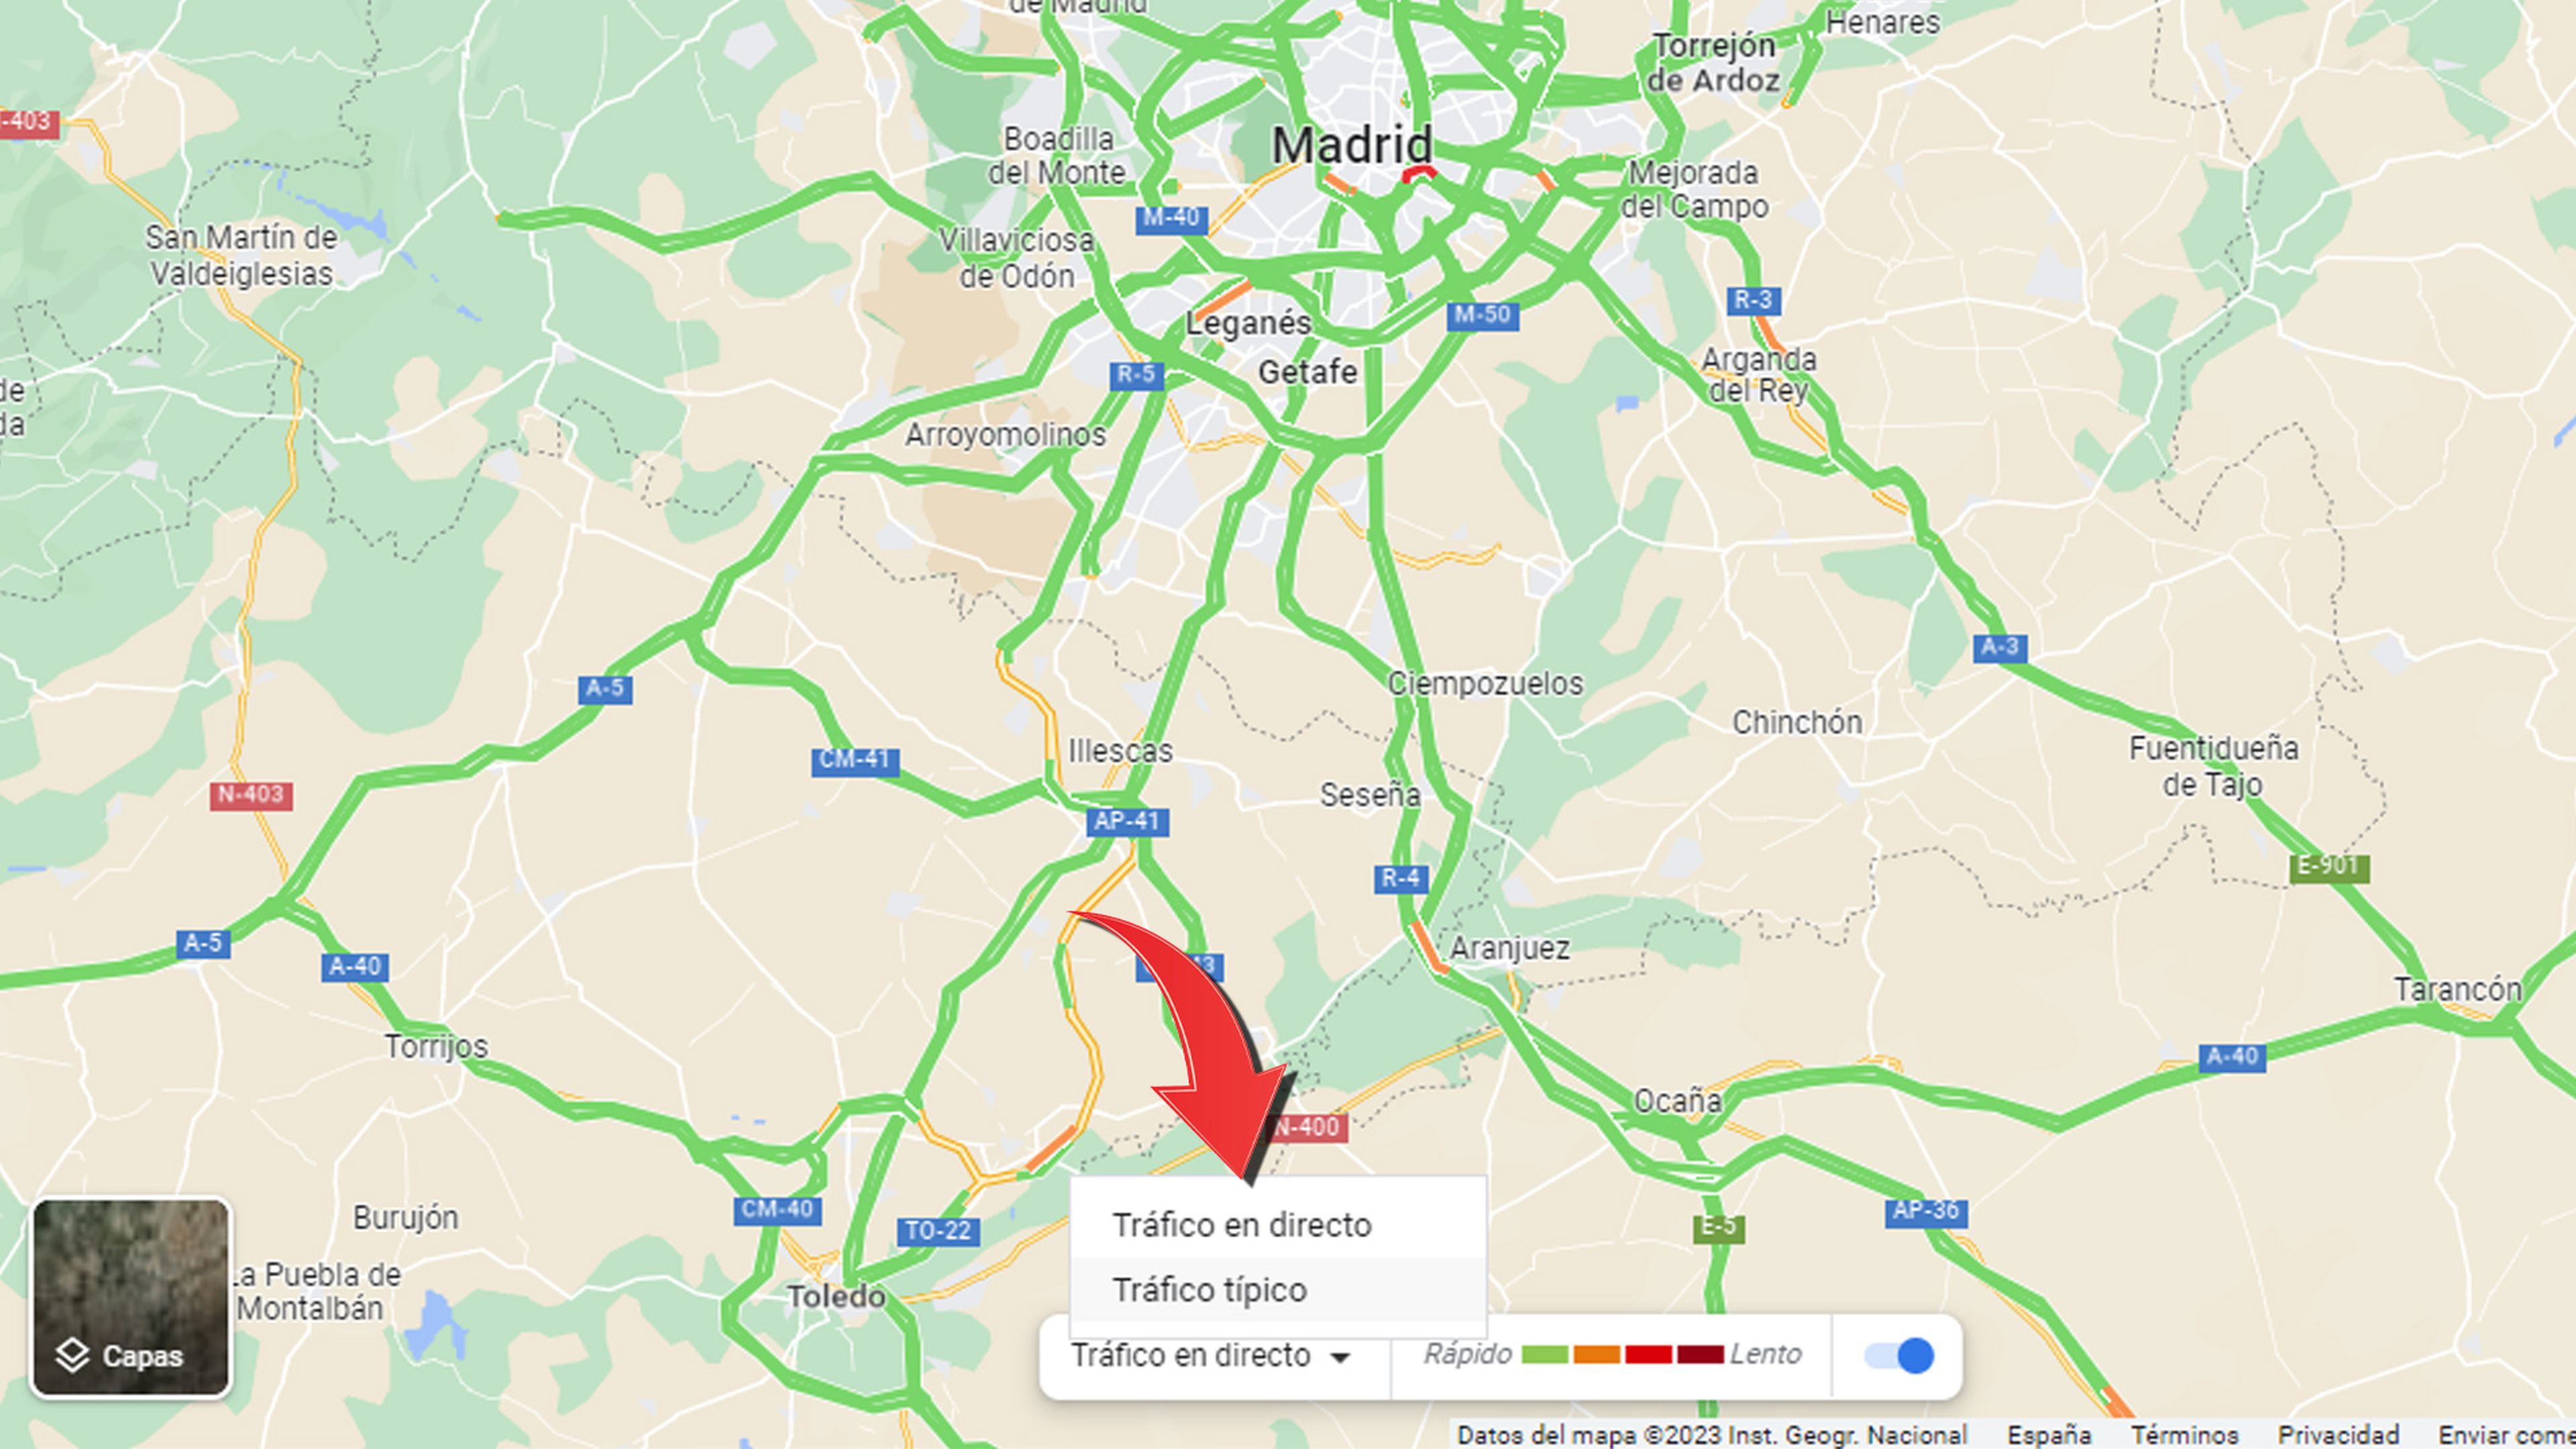 Traffic information on Google Maps for another day